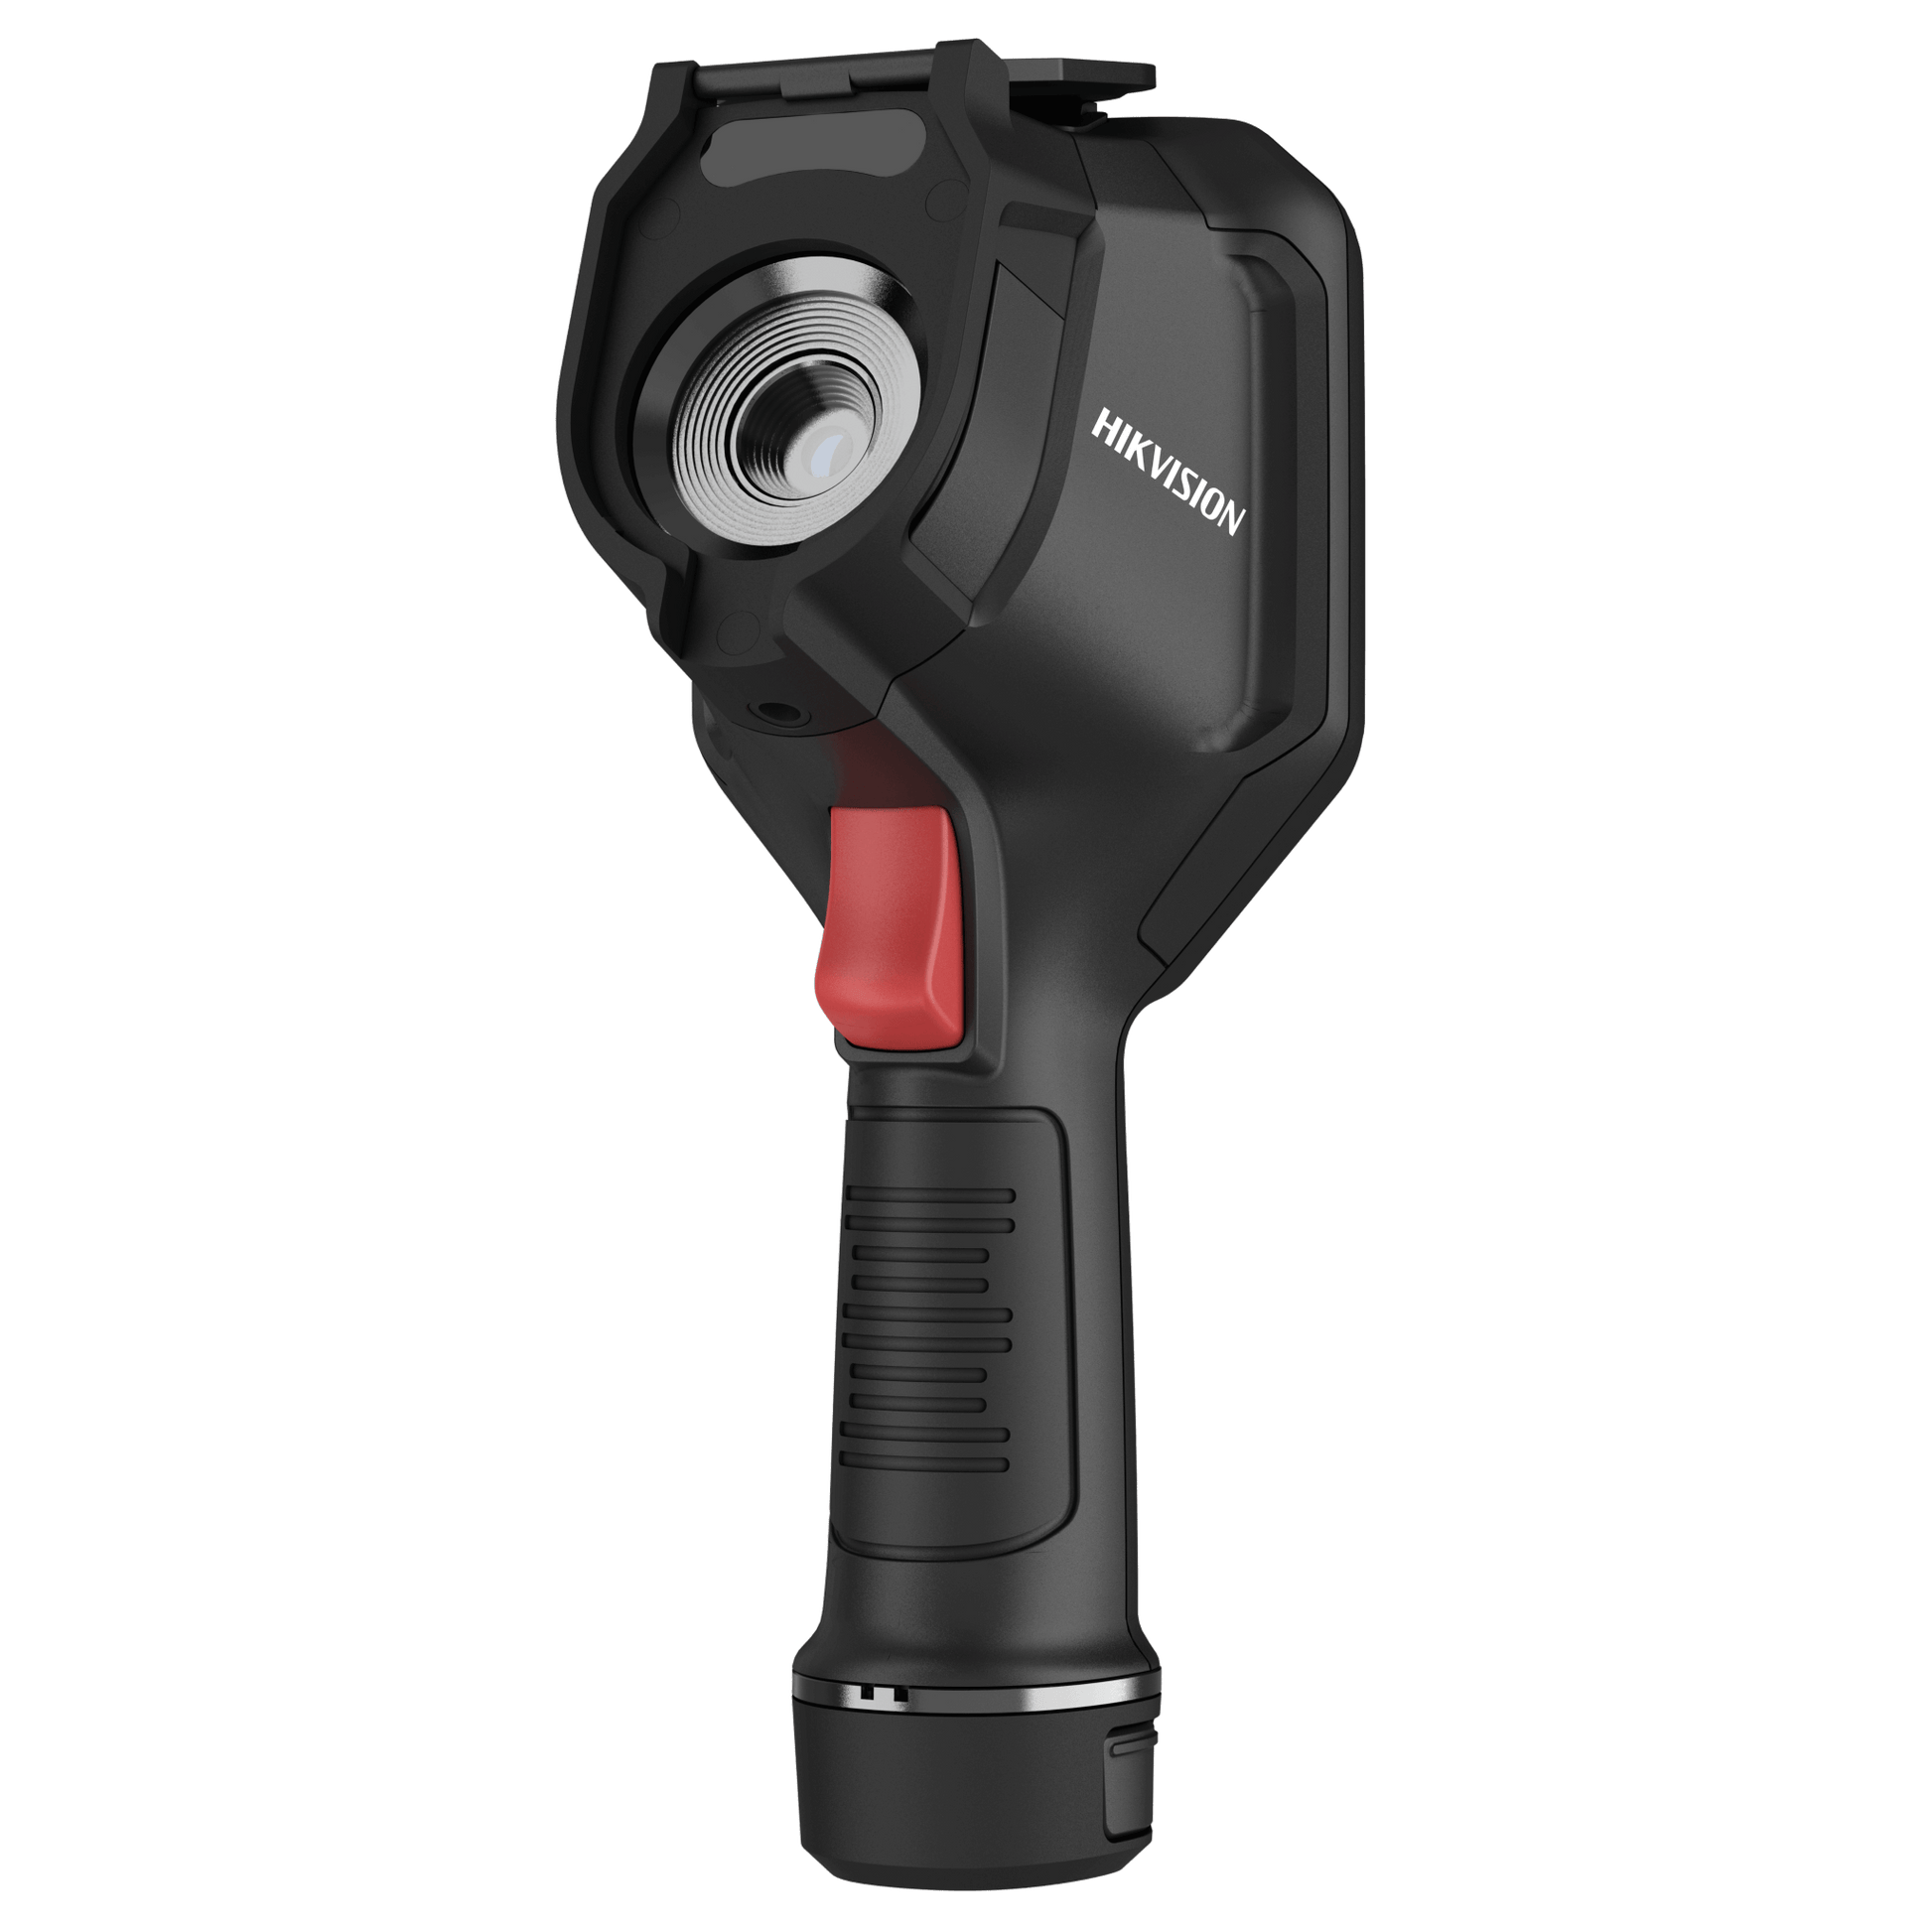 HikMicro M11W Handheld Thermography Camera lens and trigger view on a transparent background